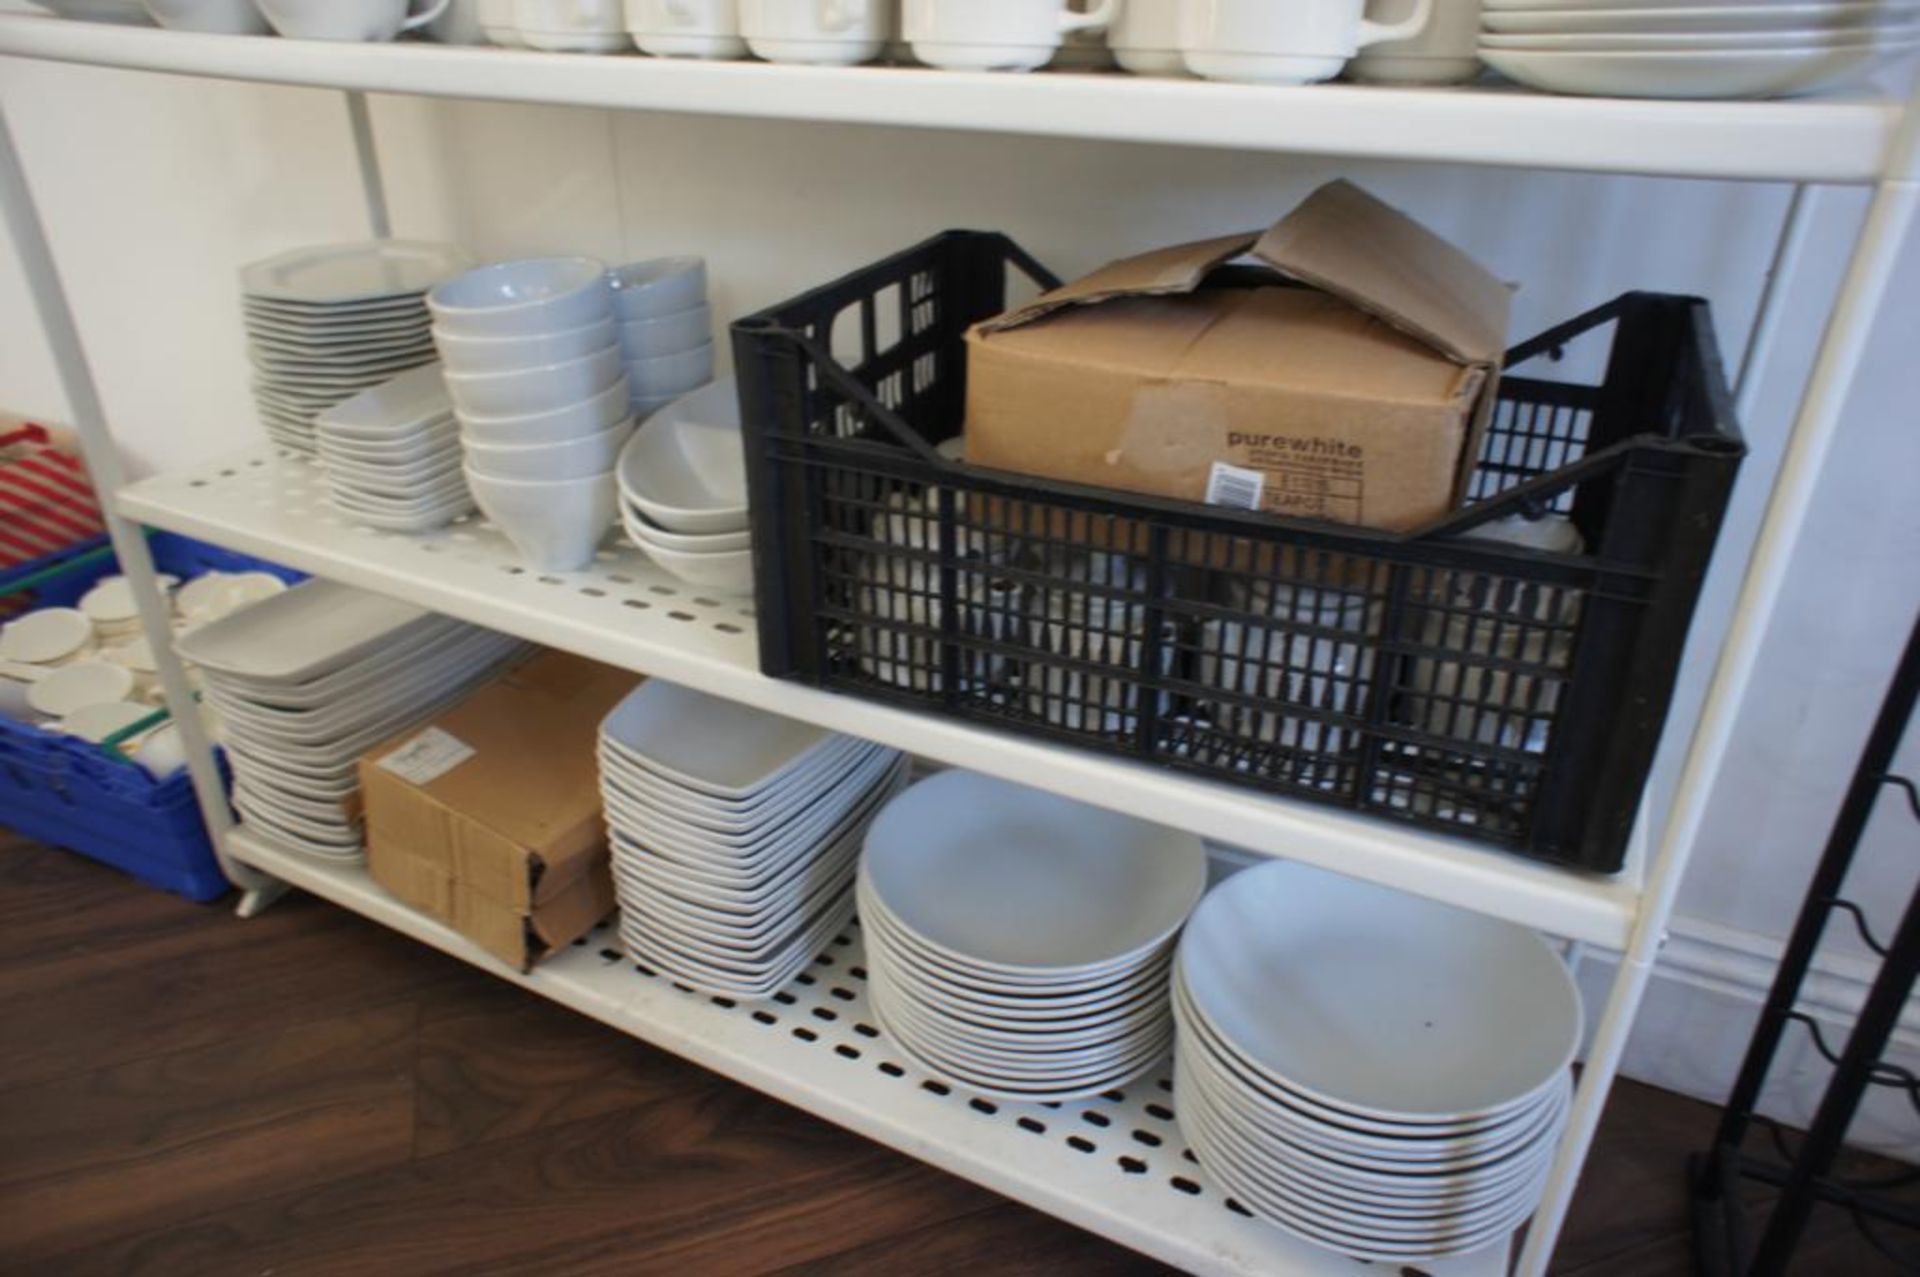 5-Tier Metal Storage Rack & Contents including Glassware, Cups, Bowls, Plates etc. - Image 5 of 8